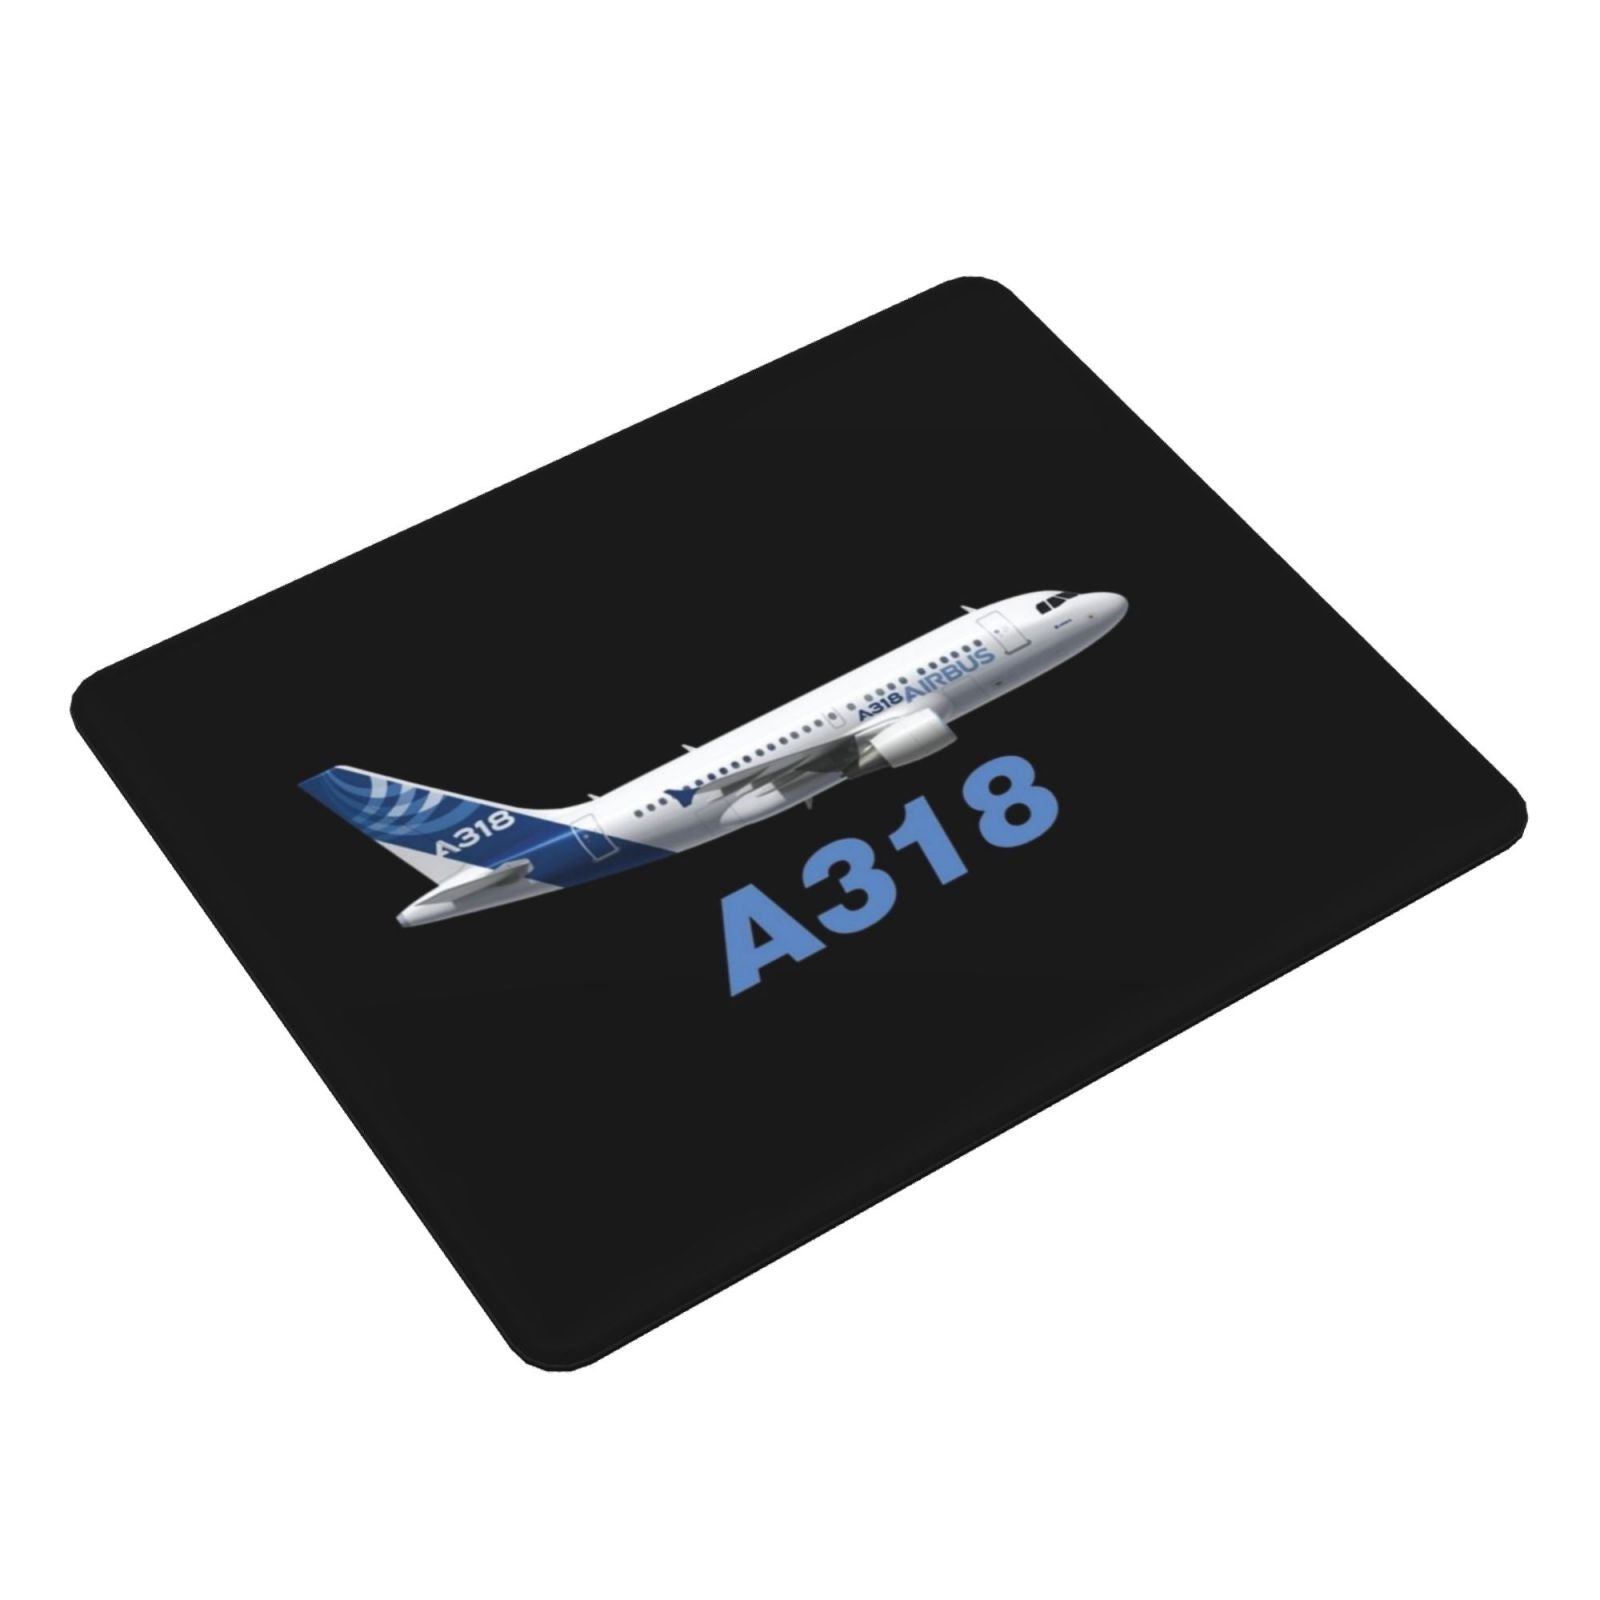 Airbus A318 Mouse Pad 349 Aviation Pilot Airplane Plane Flying Flight Fly Avgeek